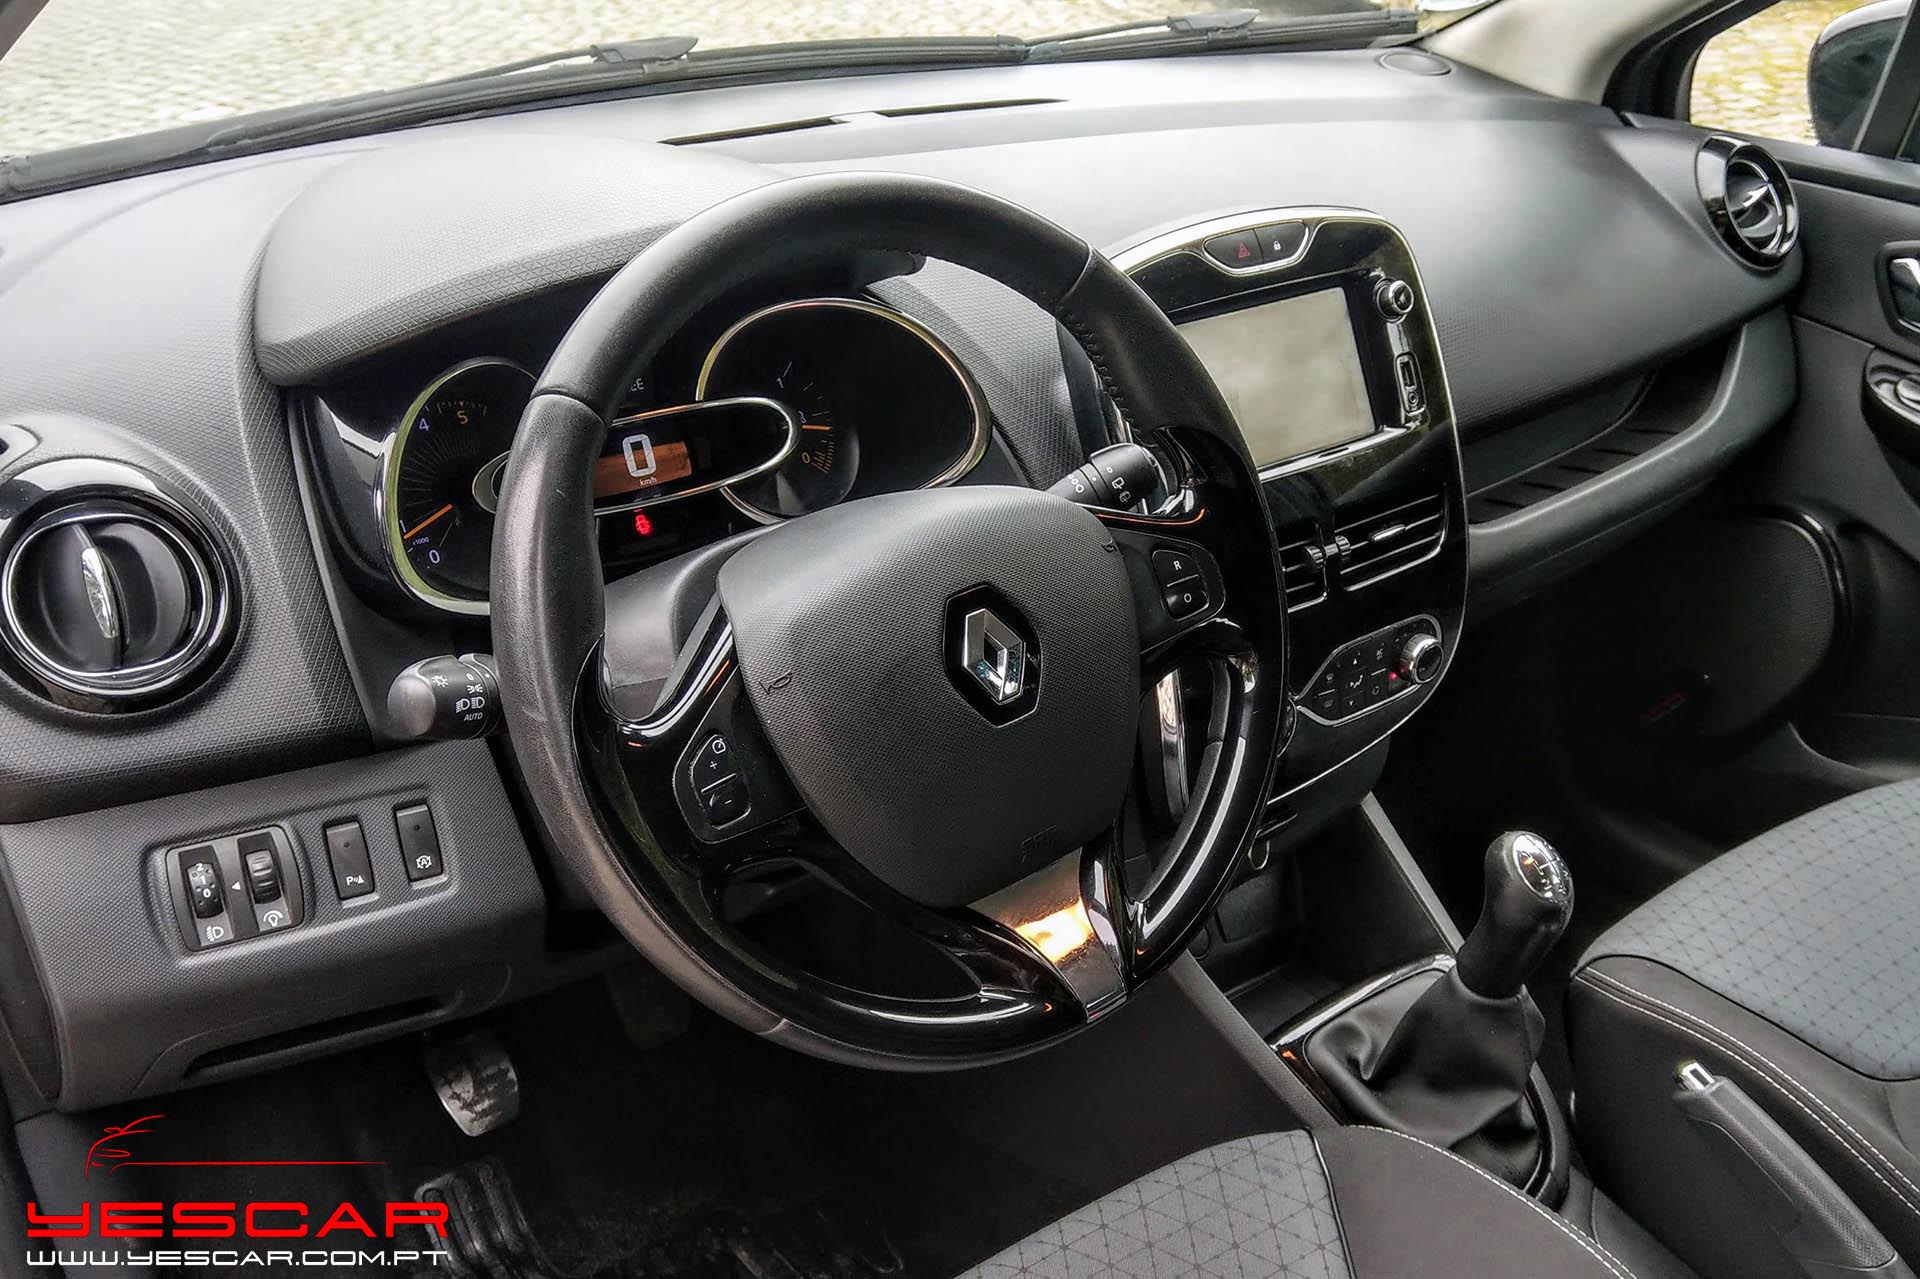 YESCAR_Renault_Clio (23)